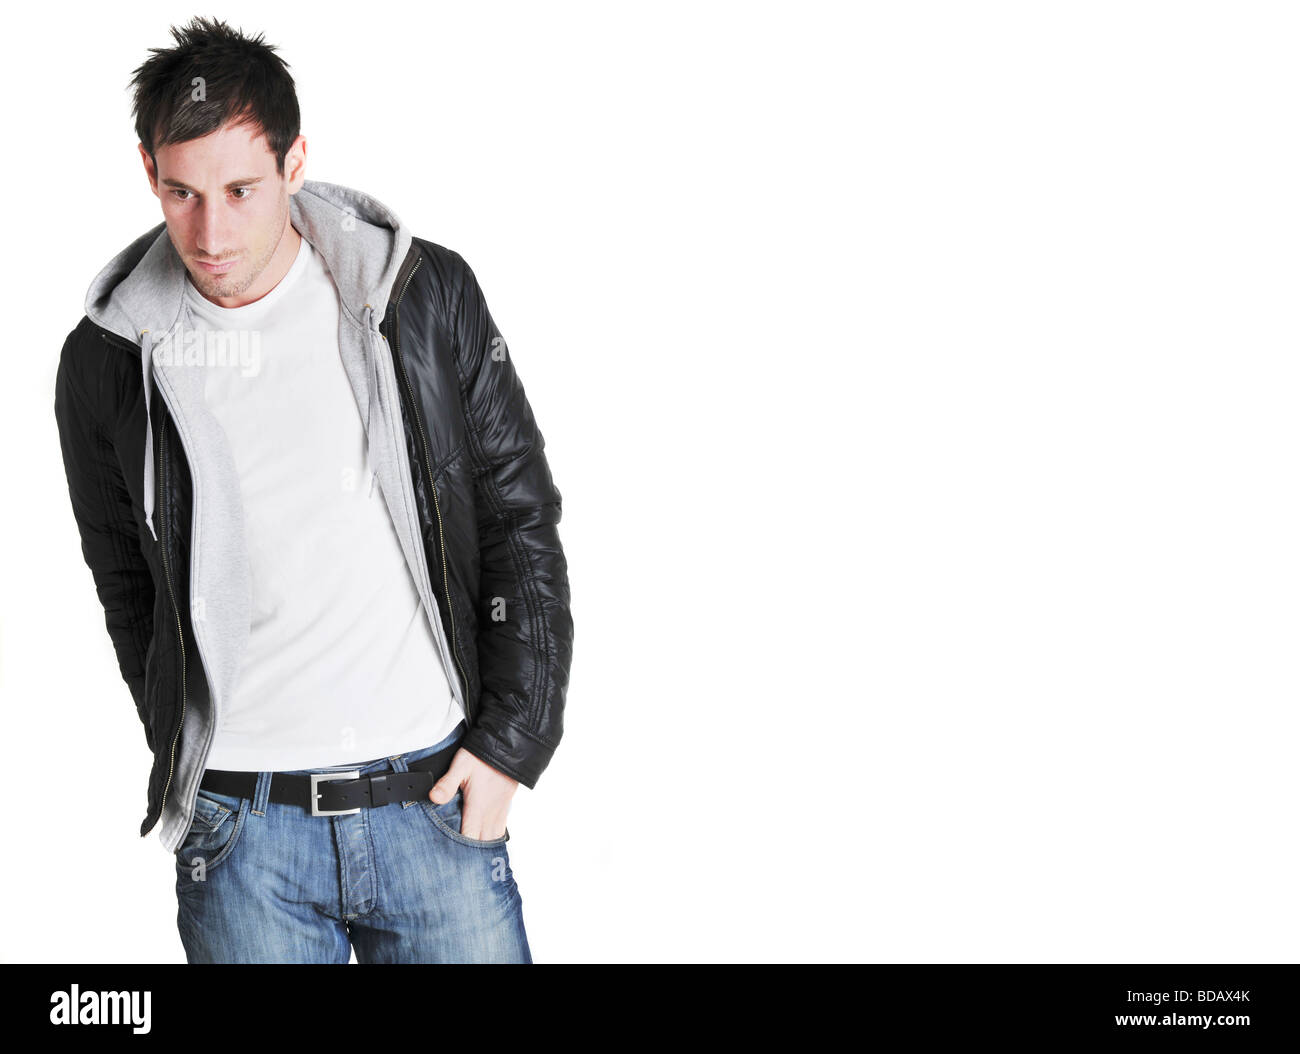 Young white man in leather jacket, jeans and white t-shirt looking off  camera Stock Photo - Alamy